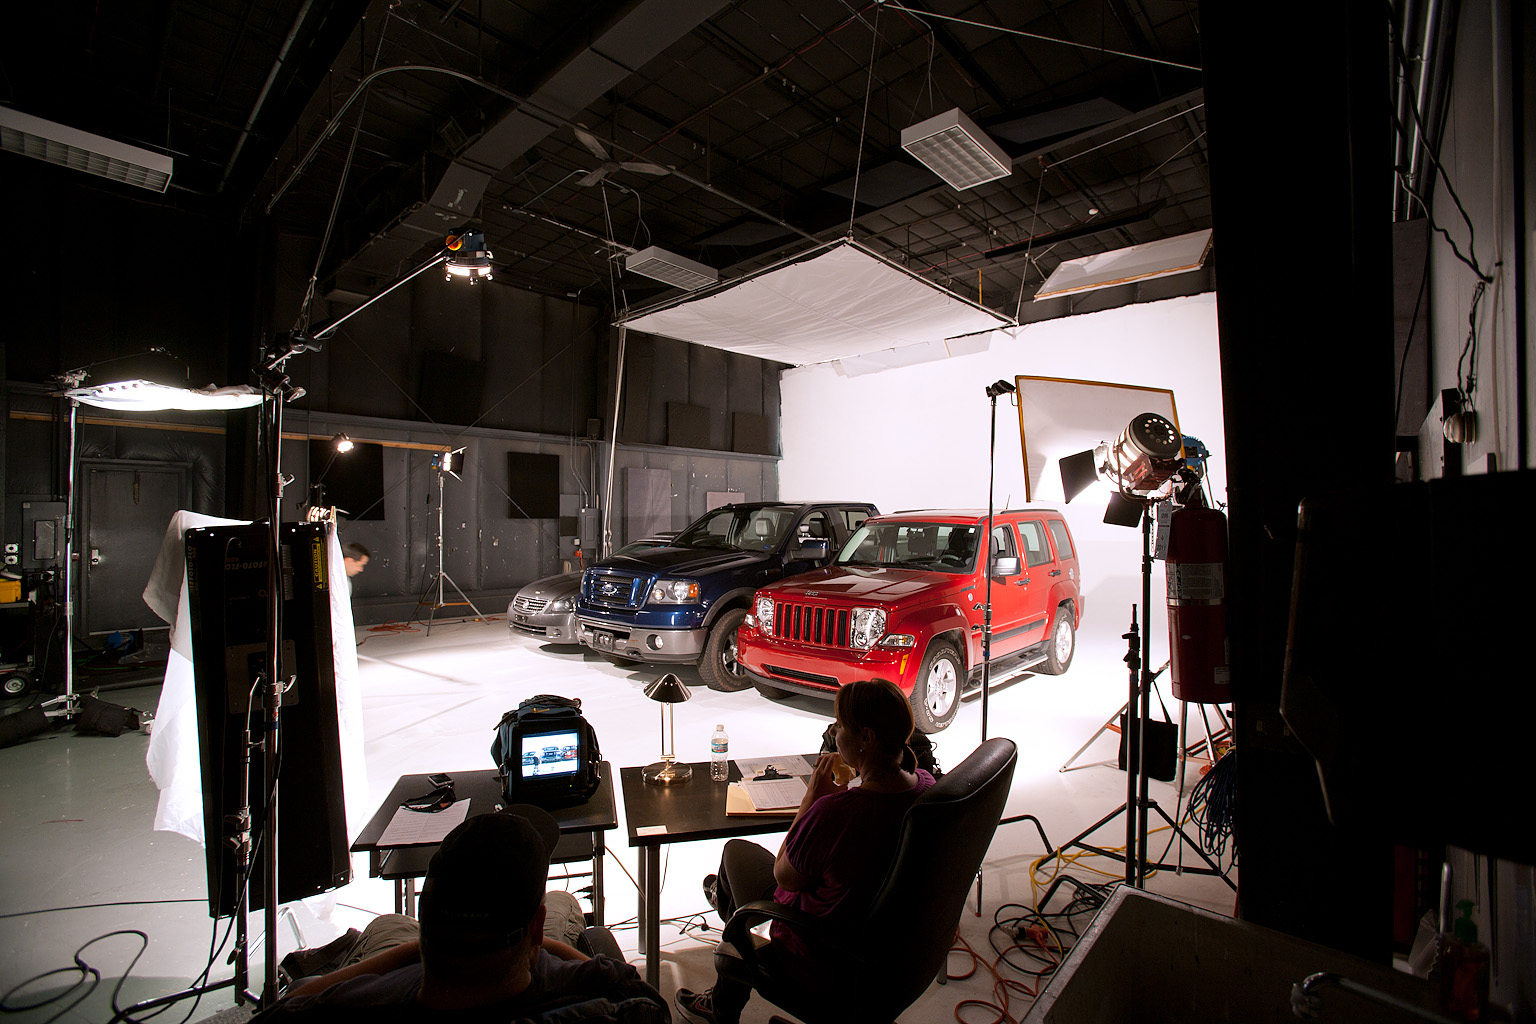 Image Studios is a large midwest video production studio